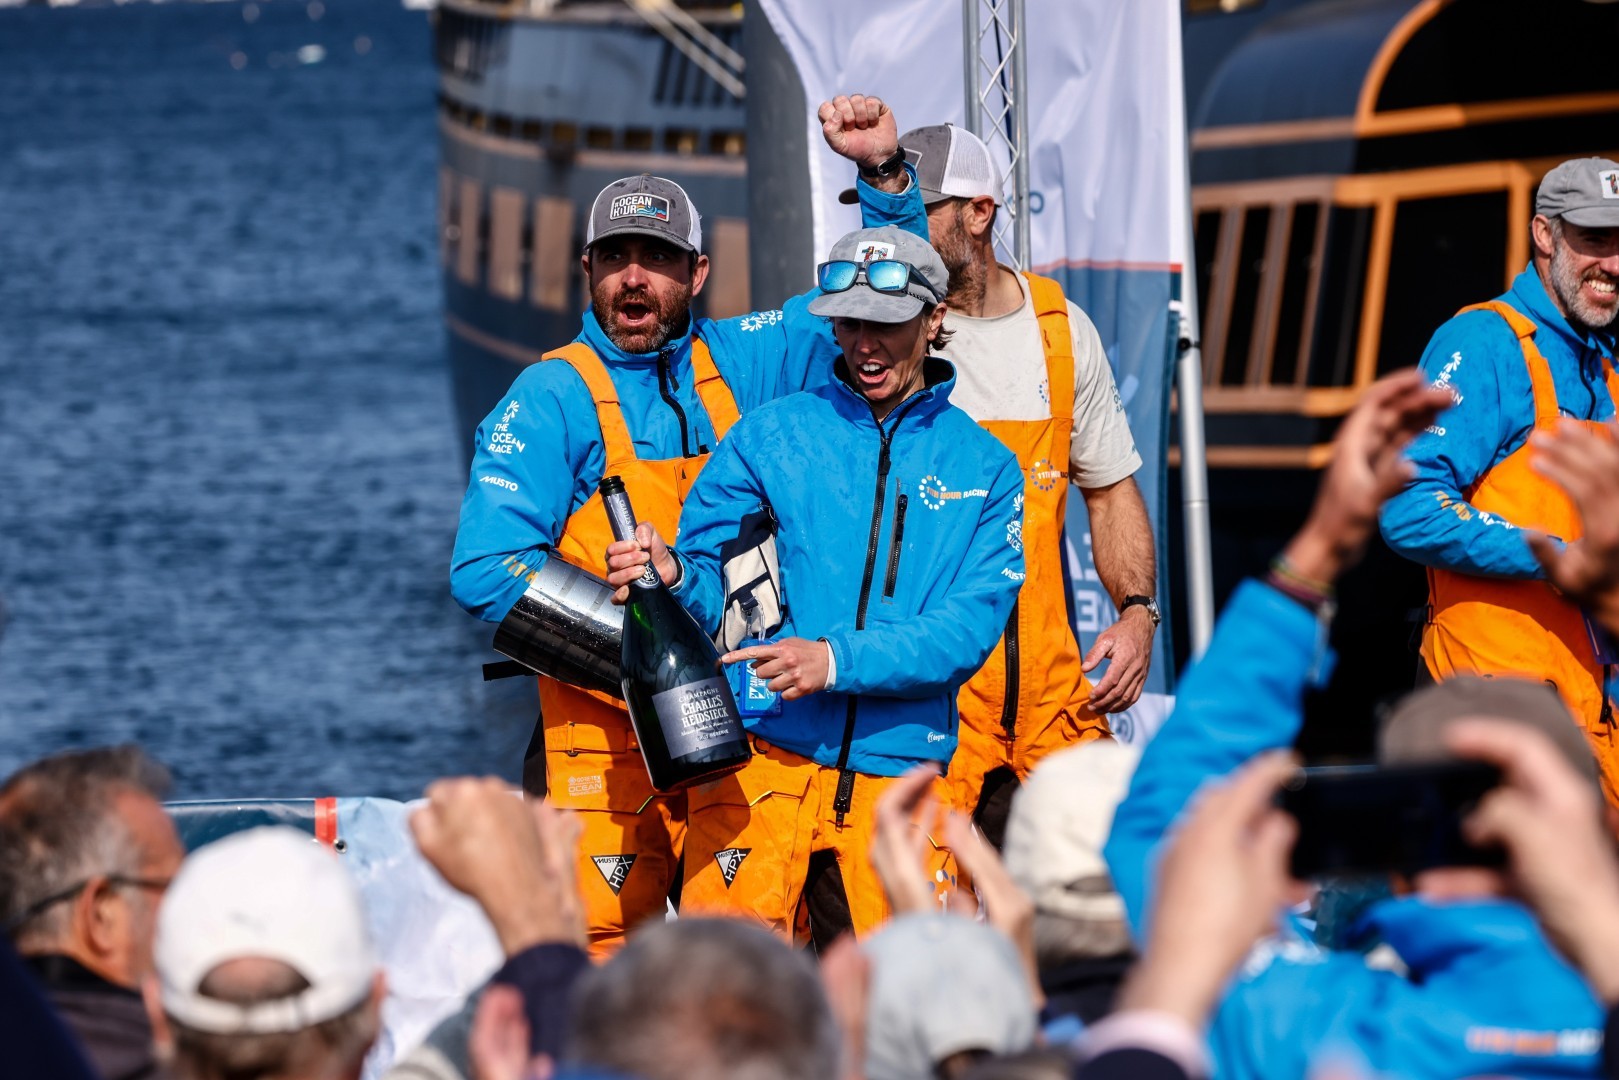 The Ocean Race 2022-23 - 10 May 2023. Leg 4 arrivals in Newport. Francesca Clapcich celebrates first place for 11th Hour Racing Team on Leg 4.
© Sailing Energy / The Ocean Race